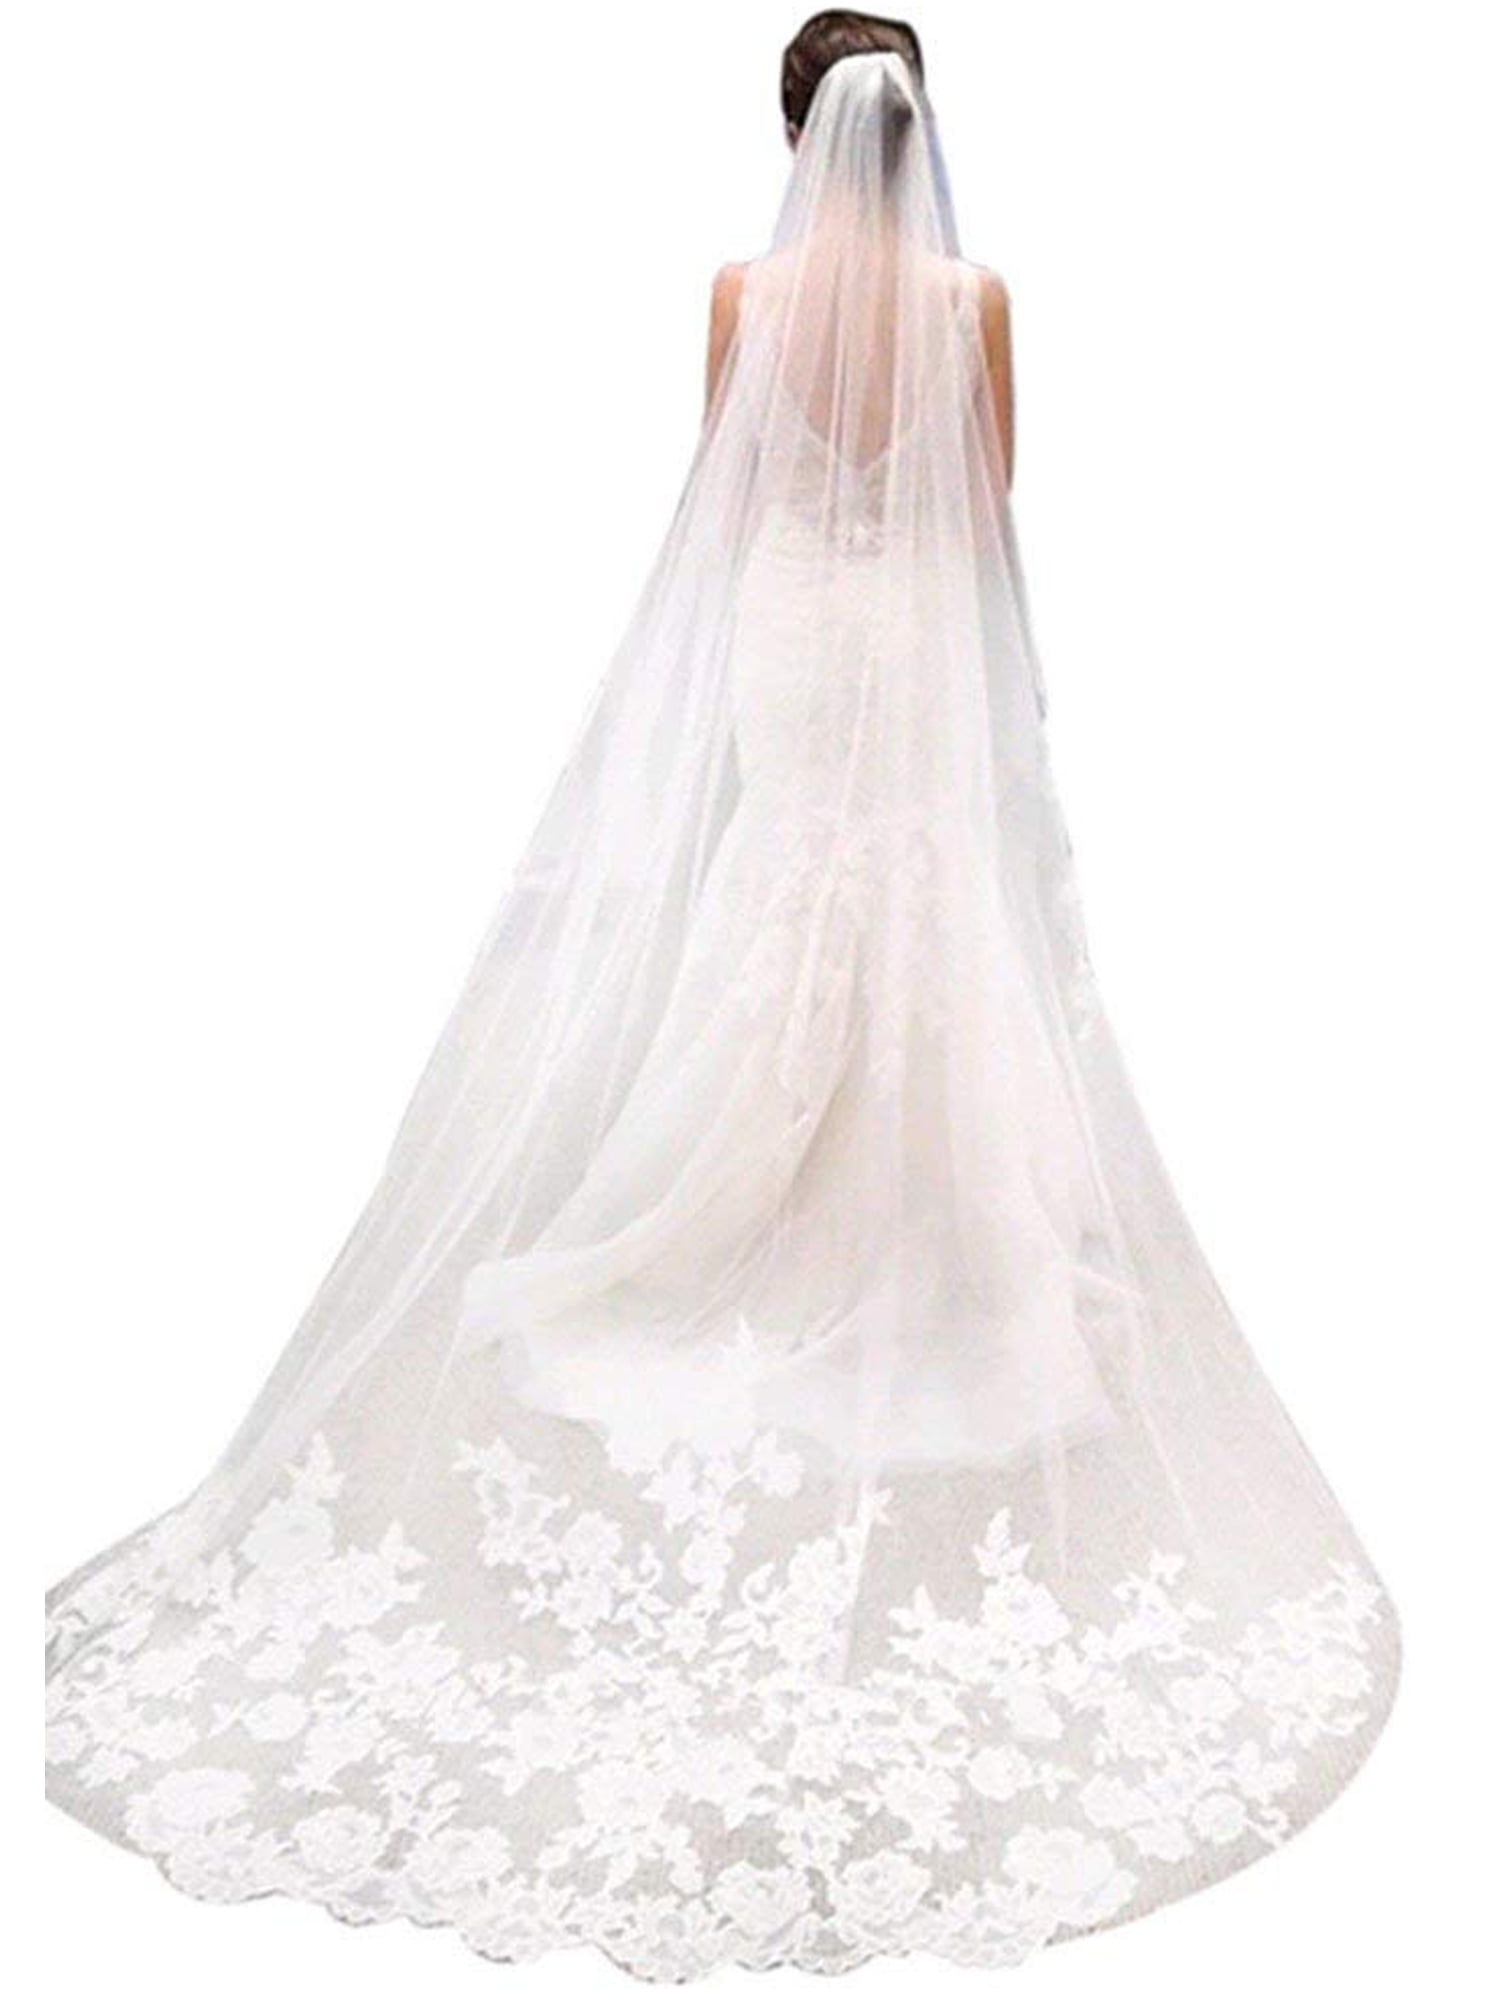 White Ivory Cathedral Wedding Veil Lace Applique Edged Bridal Veil w/ Metal Comb 